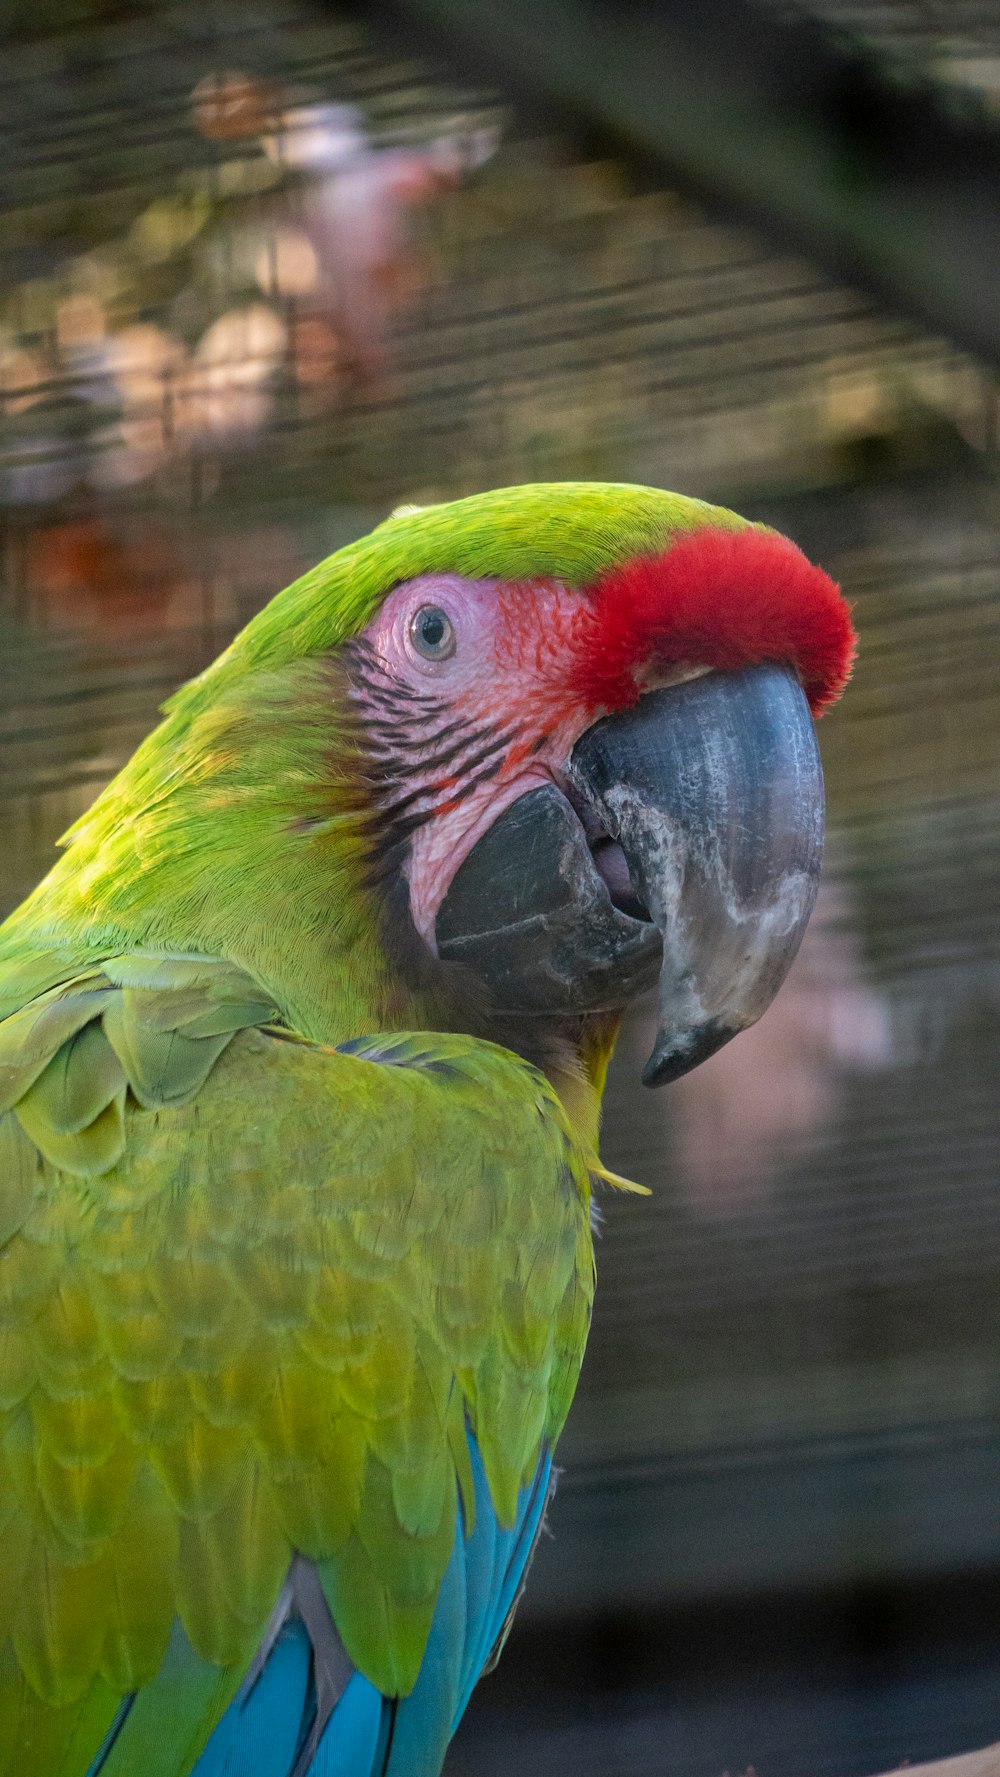 a parrot with a red head and green feathers